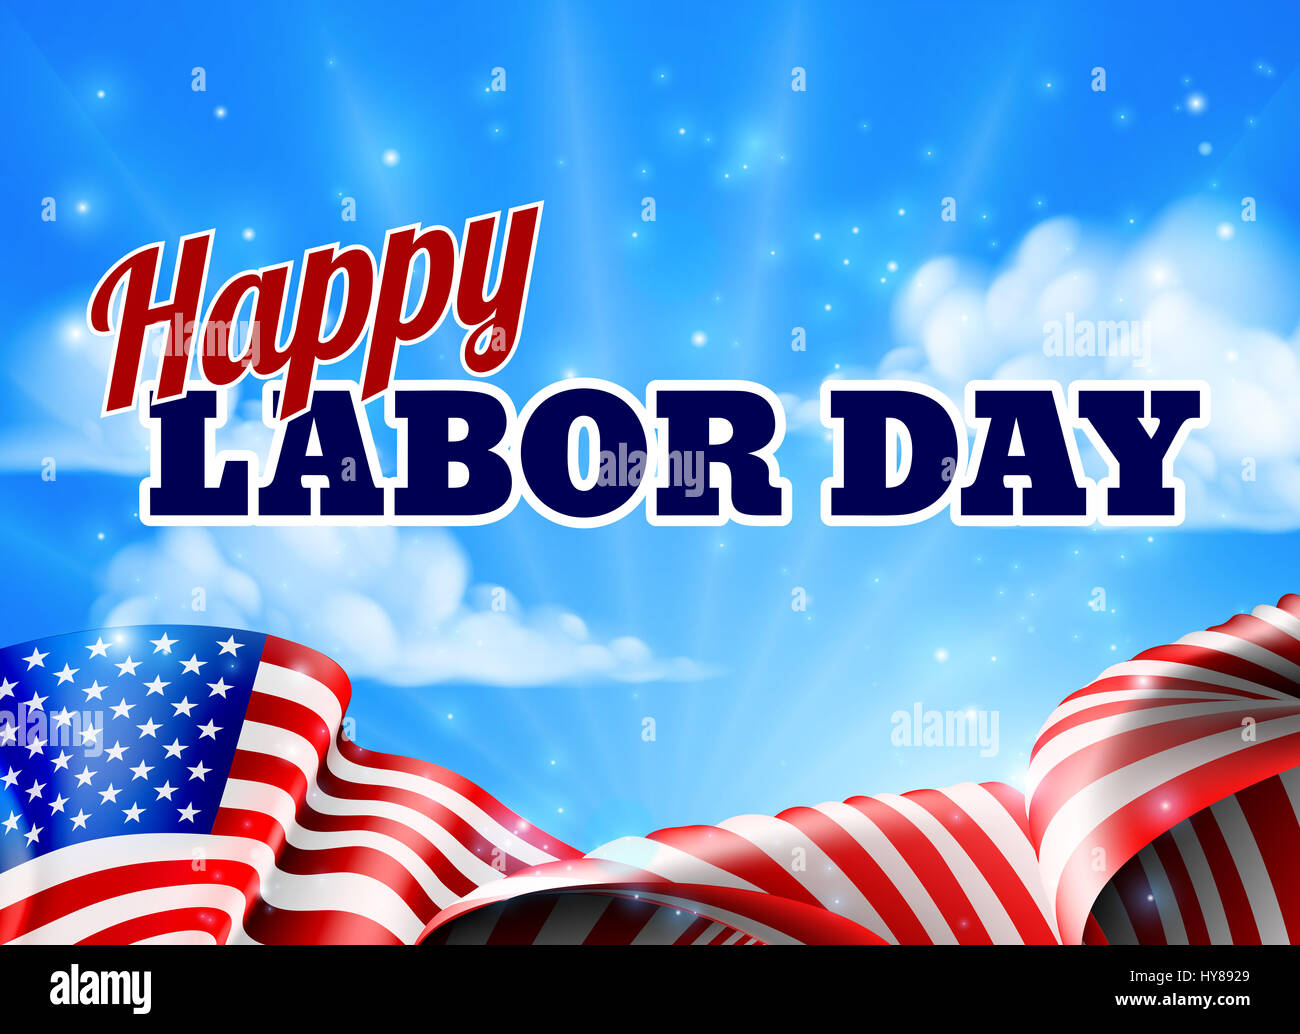 A Happy Labor Day design with an American flag banner and sky in the background Stock Photo